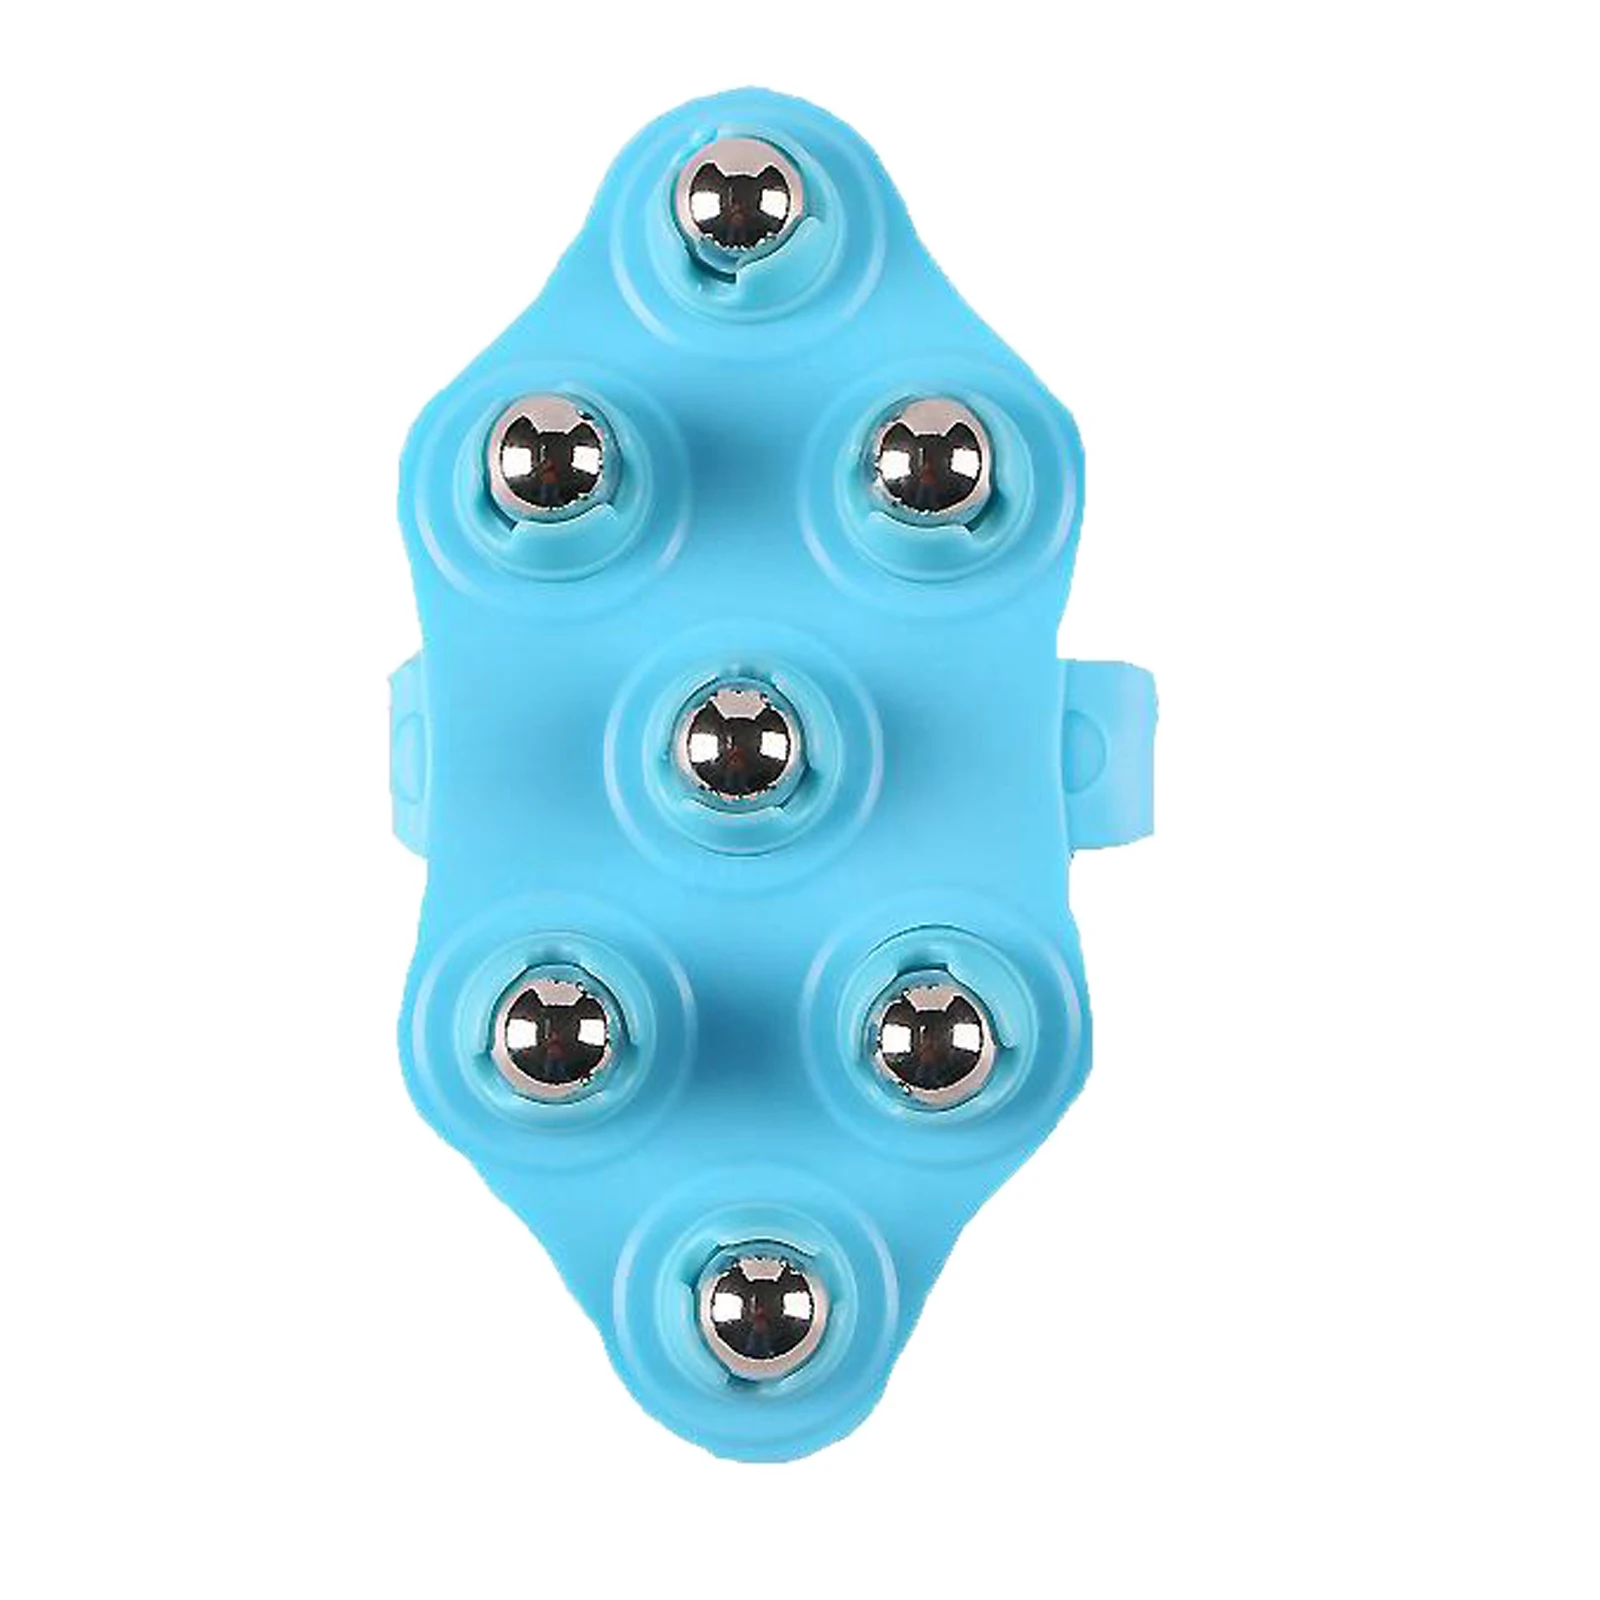 7 Ball Palm Shaped Lymphatic Hand Held Massager with Magnetic for Neck Roller Ball Massage Stress Relief Muscle Roller